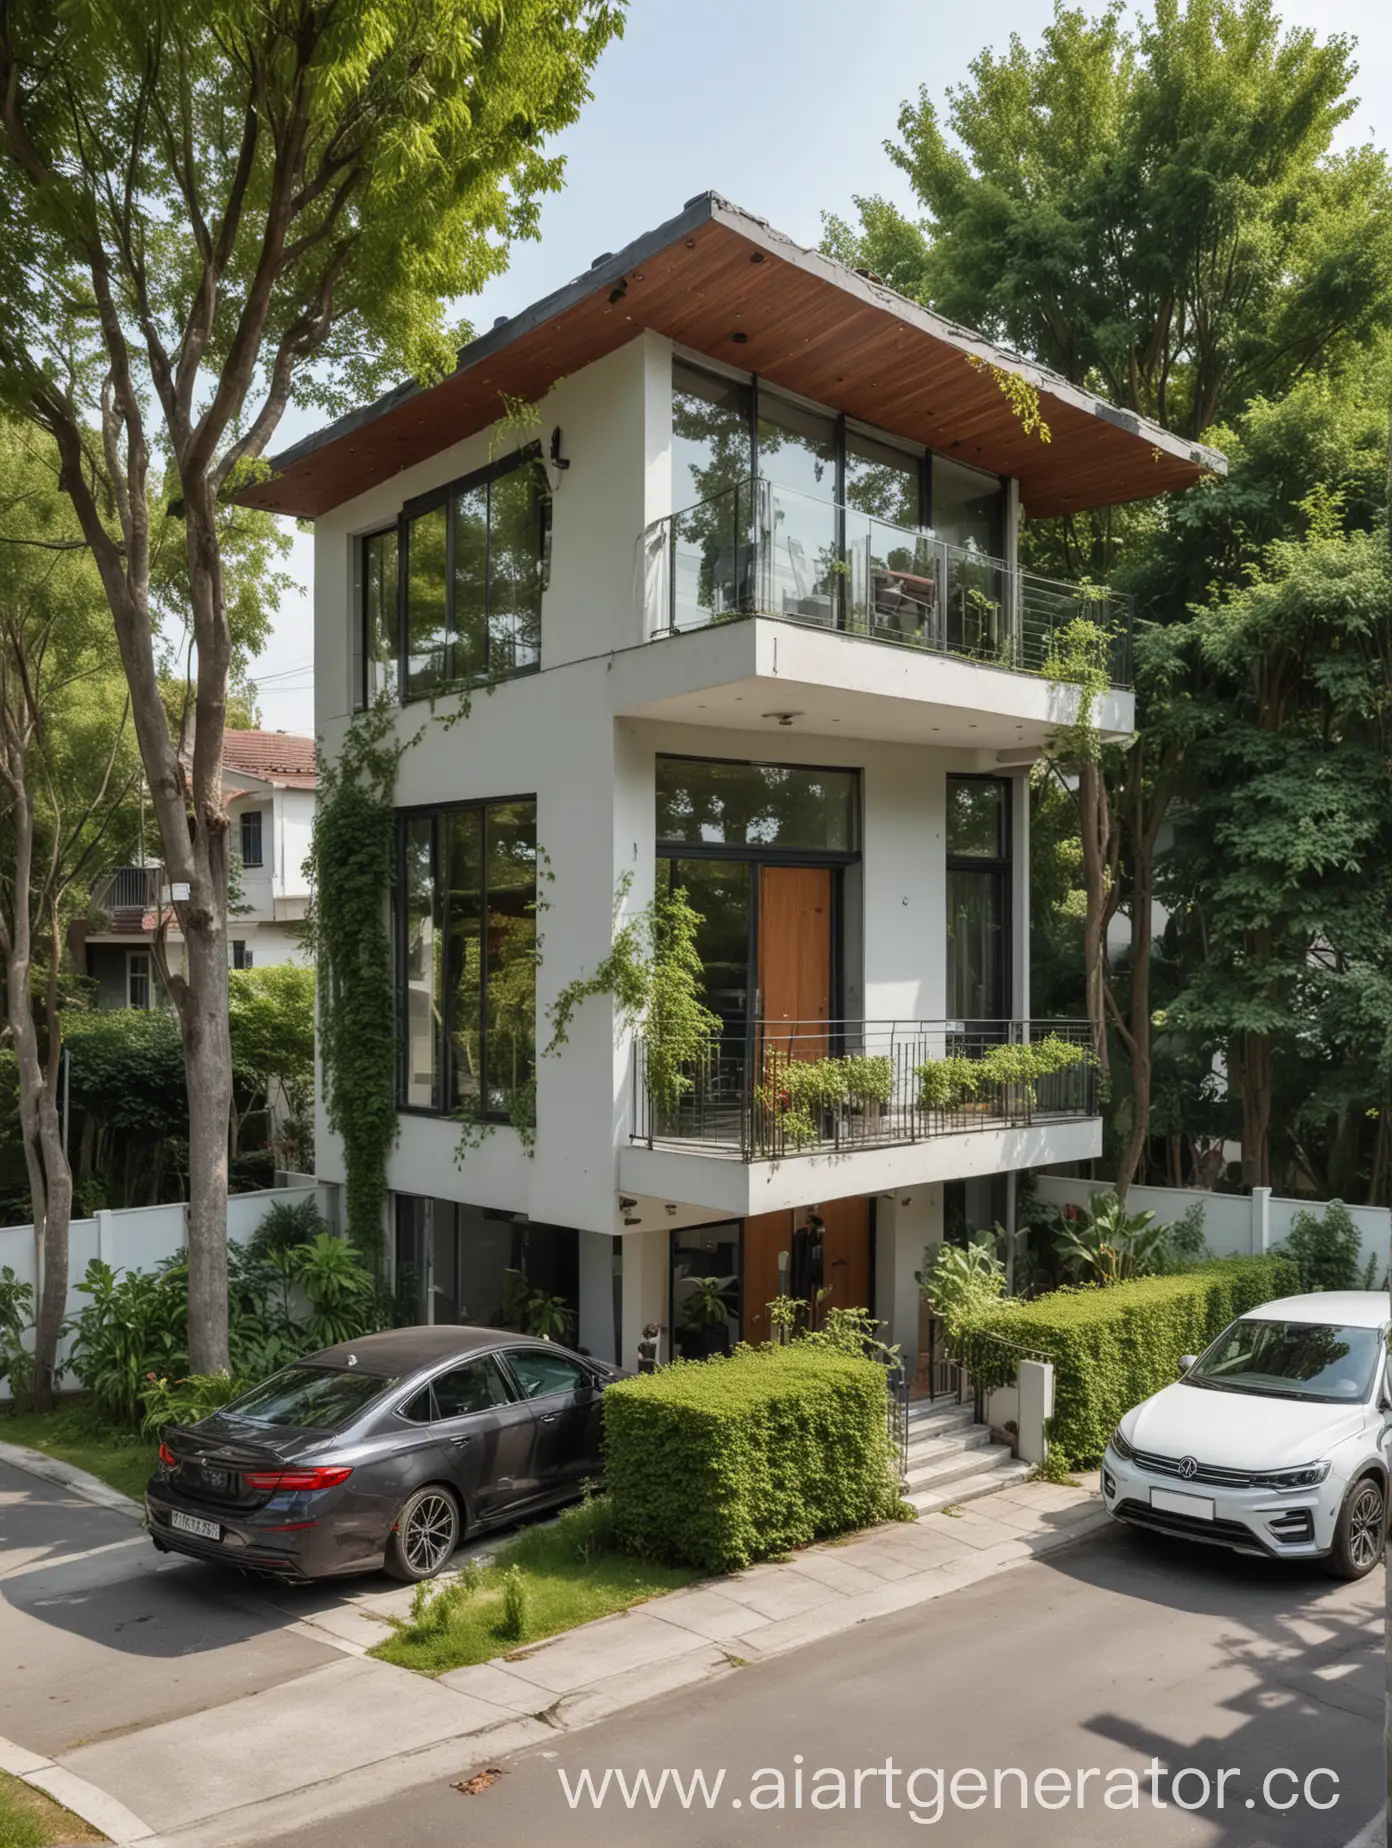 Happy-People-Enjoying-Modern-TwoStory-House-with-Greenery-and-Parking